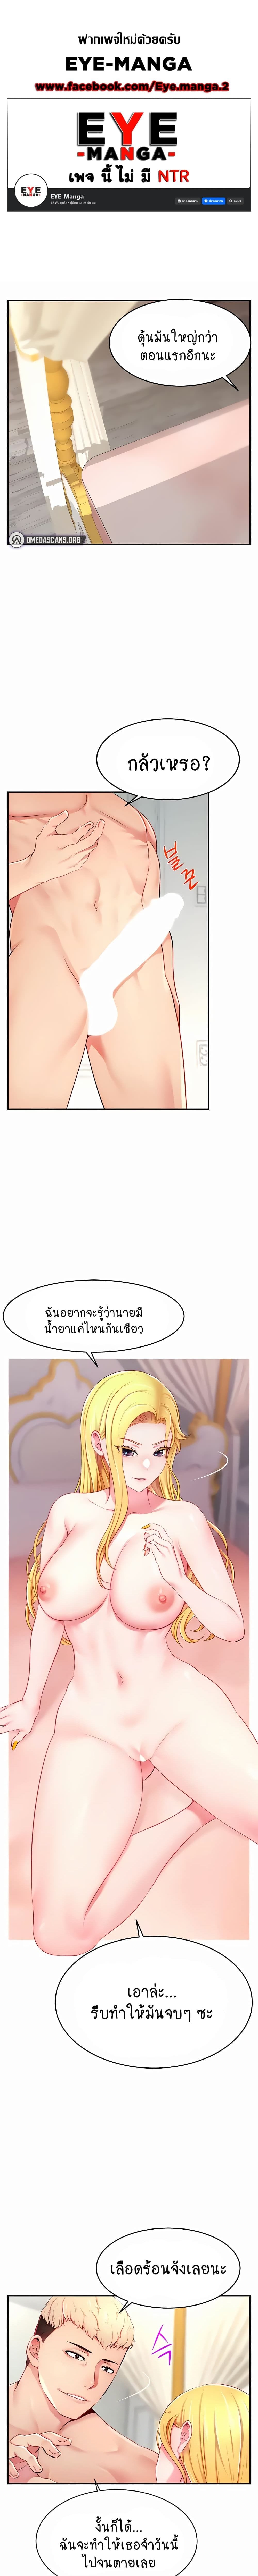 Making Friends With Streamers by Hacking! ตอนที่ 5 ภาพ 0